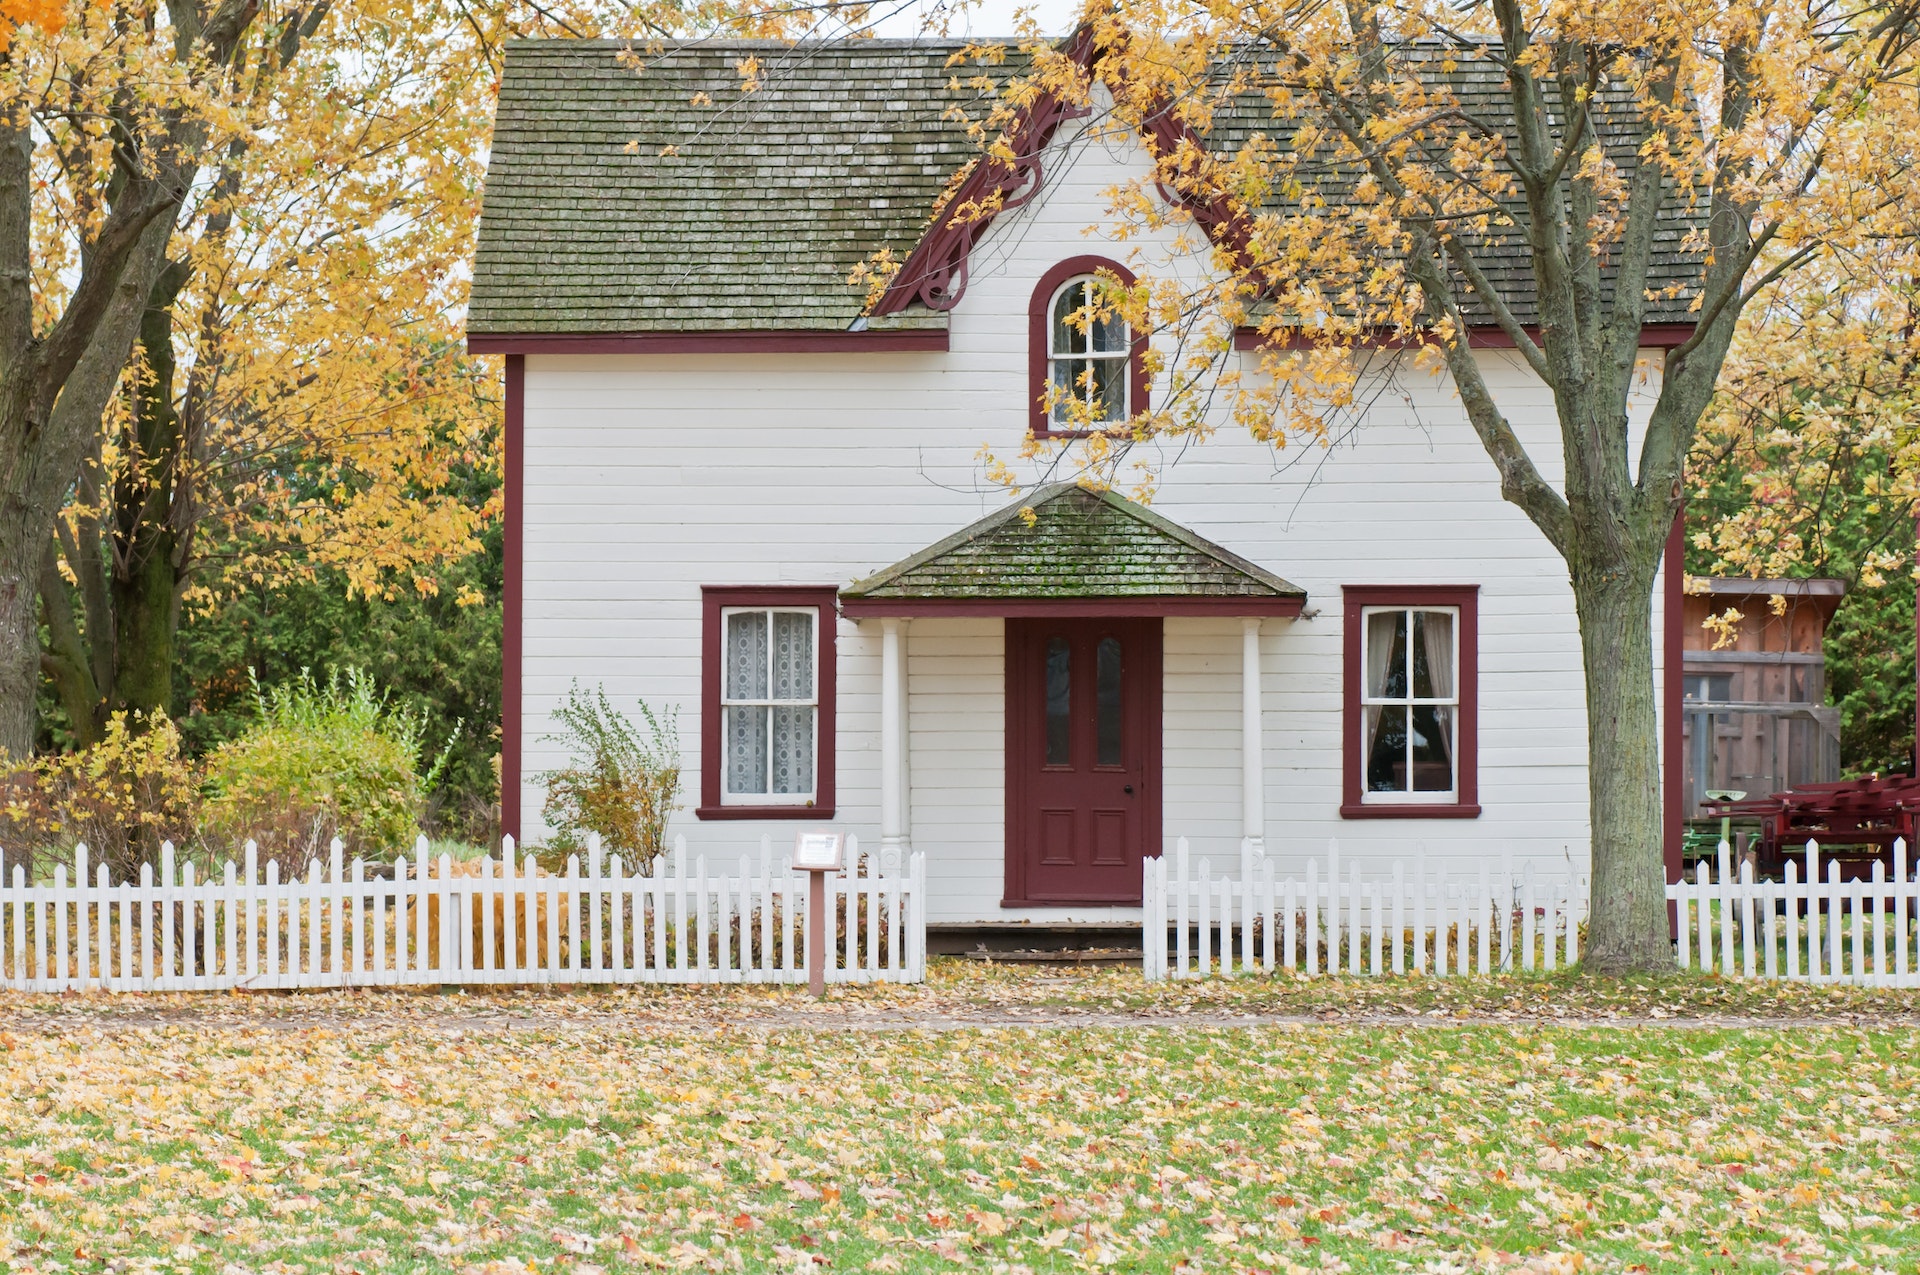 White and red wooden house with fence and trees with leaves changing color and falling.